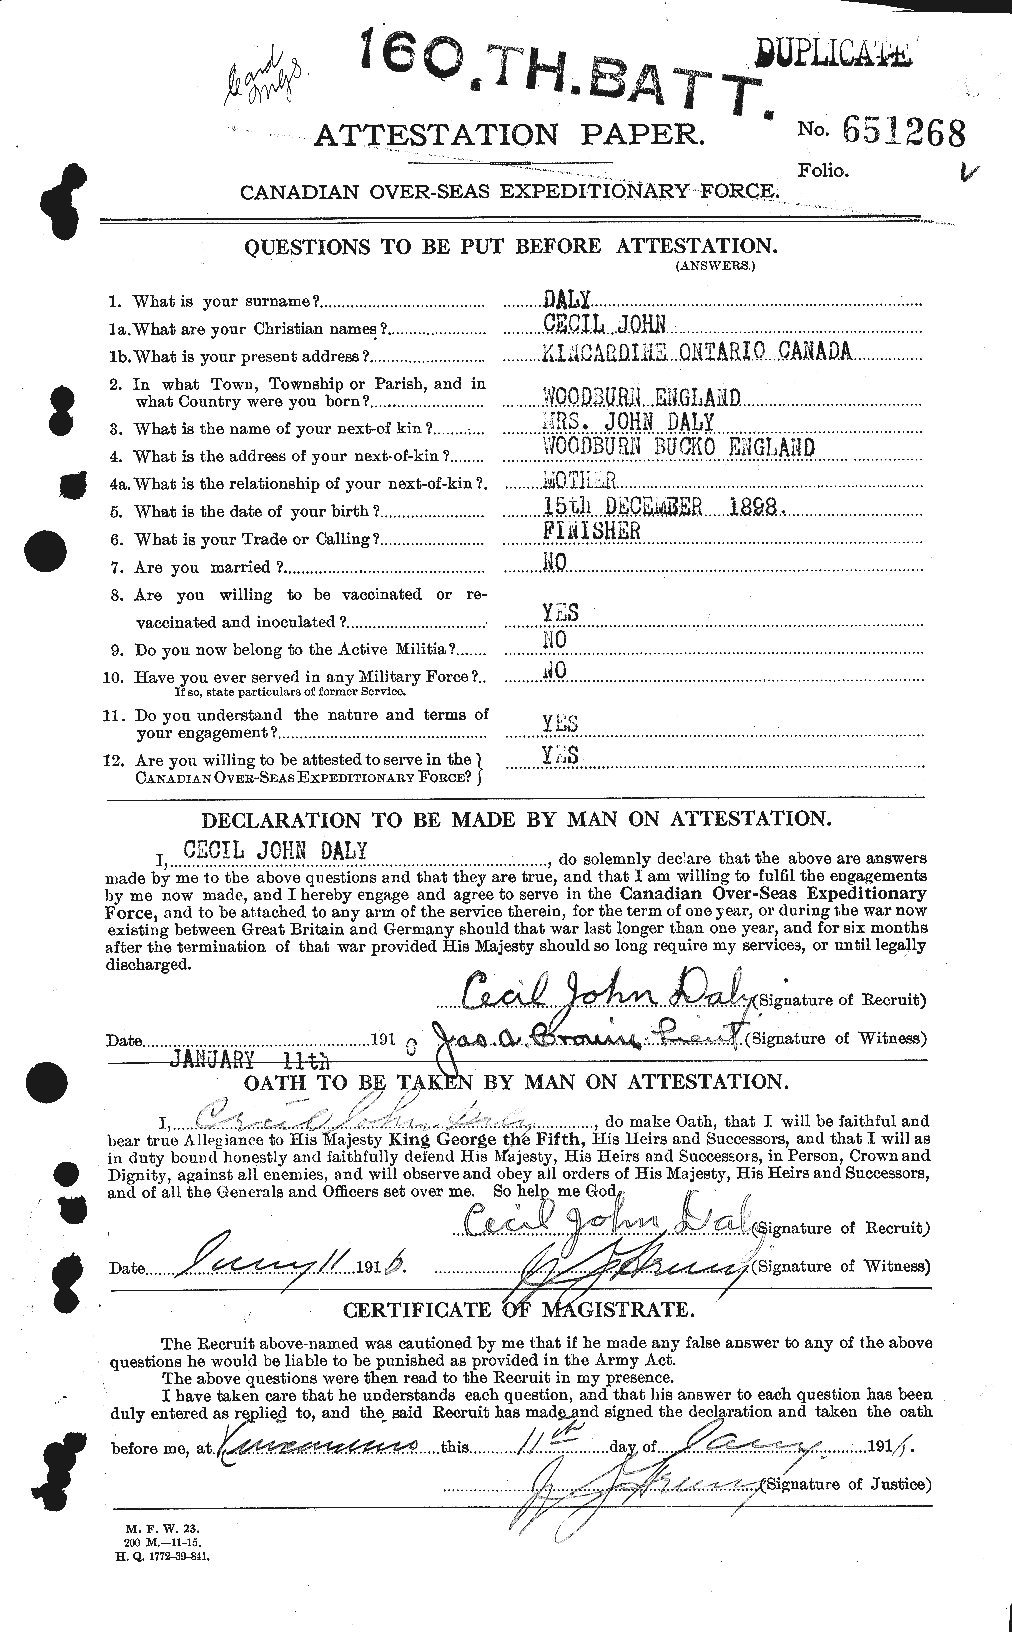 Personnel Records of the First World War - CEF 276275a